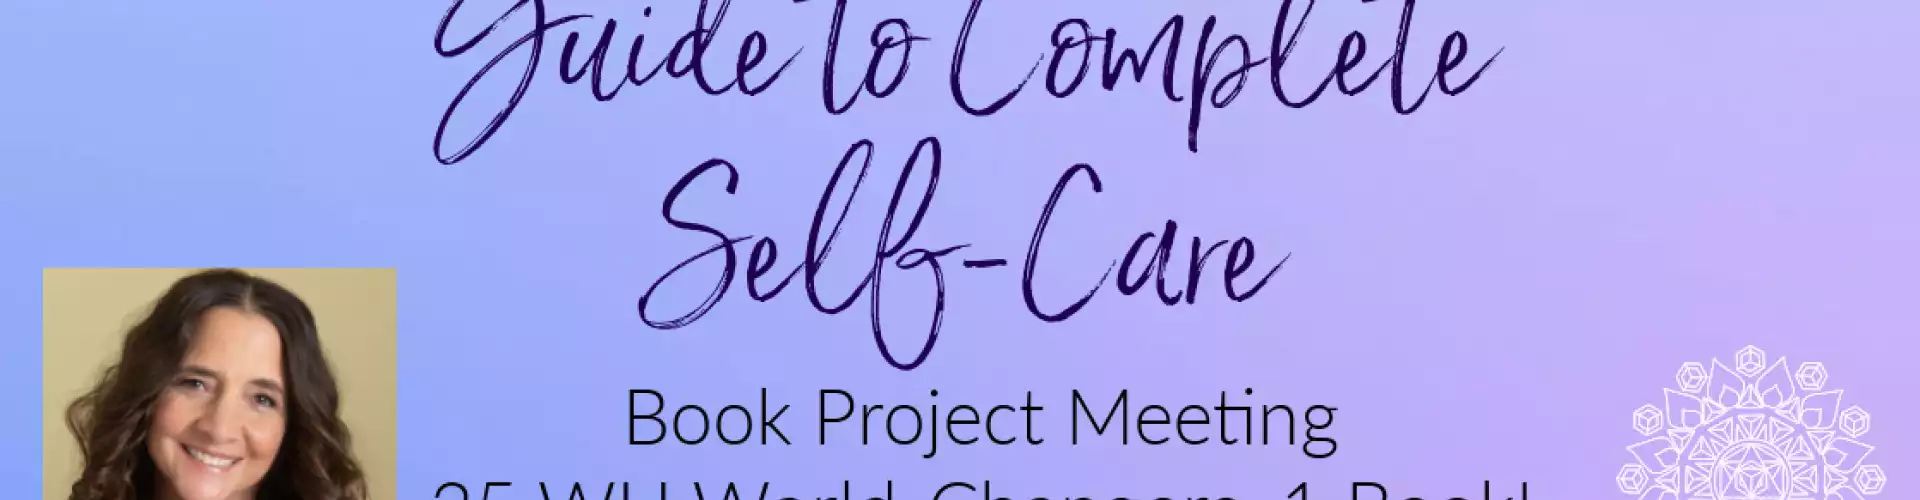 Guide to Complete Self Care Book led by Anna & Laura